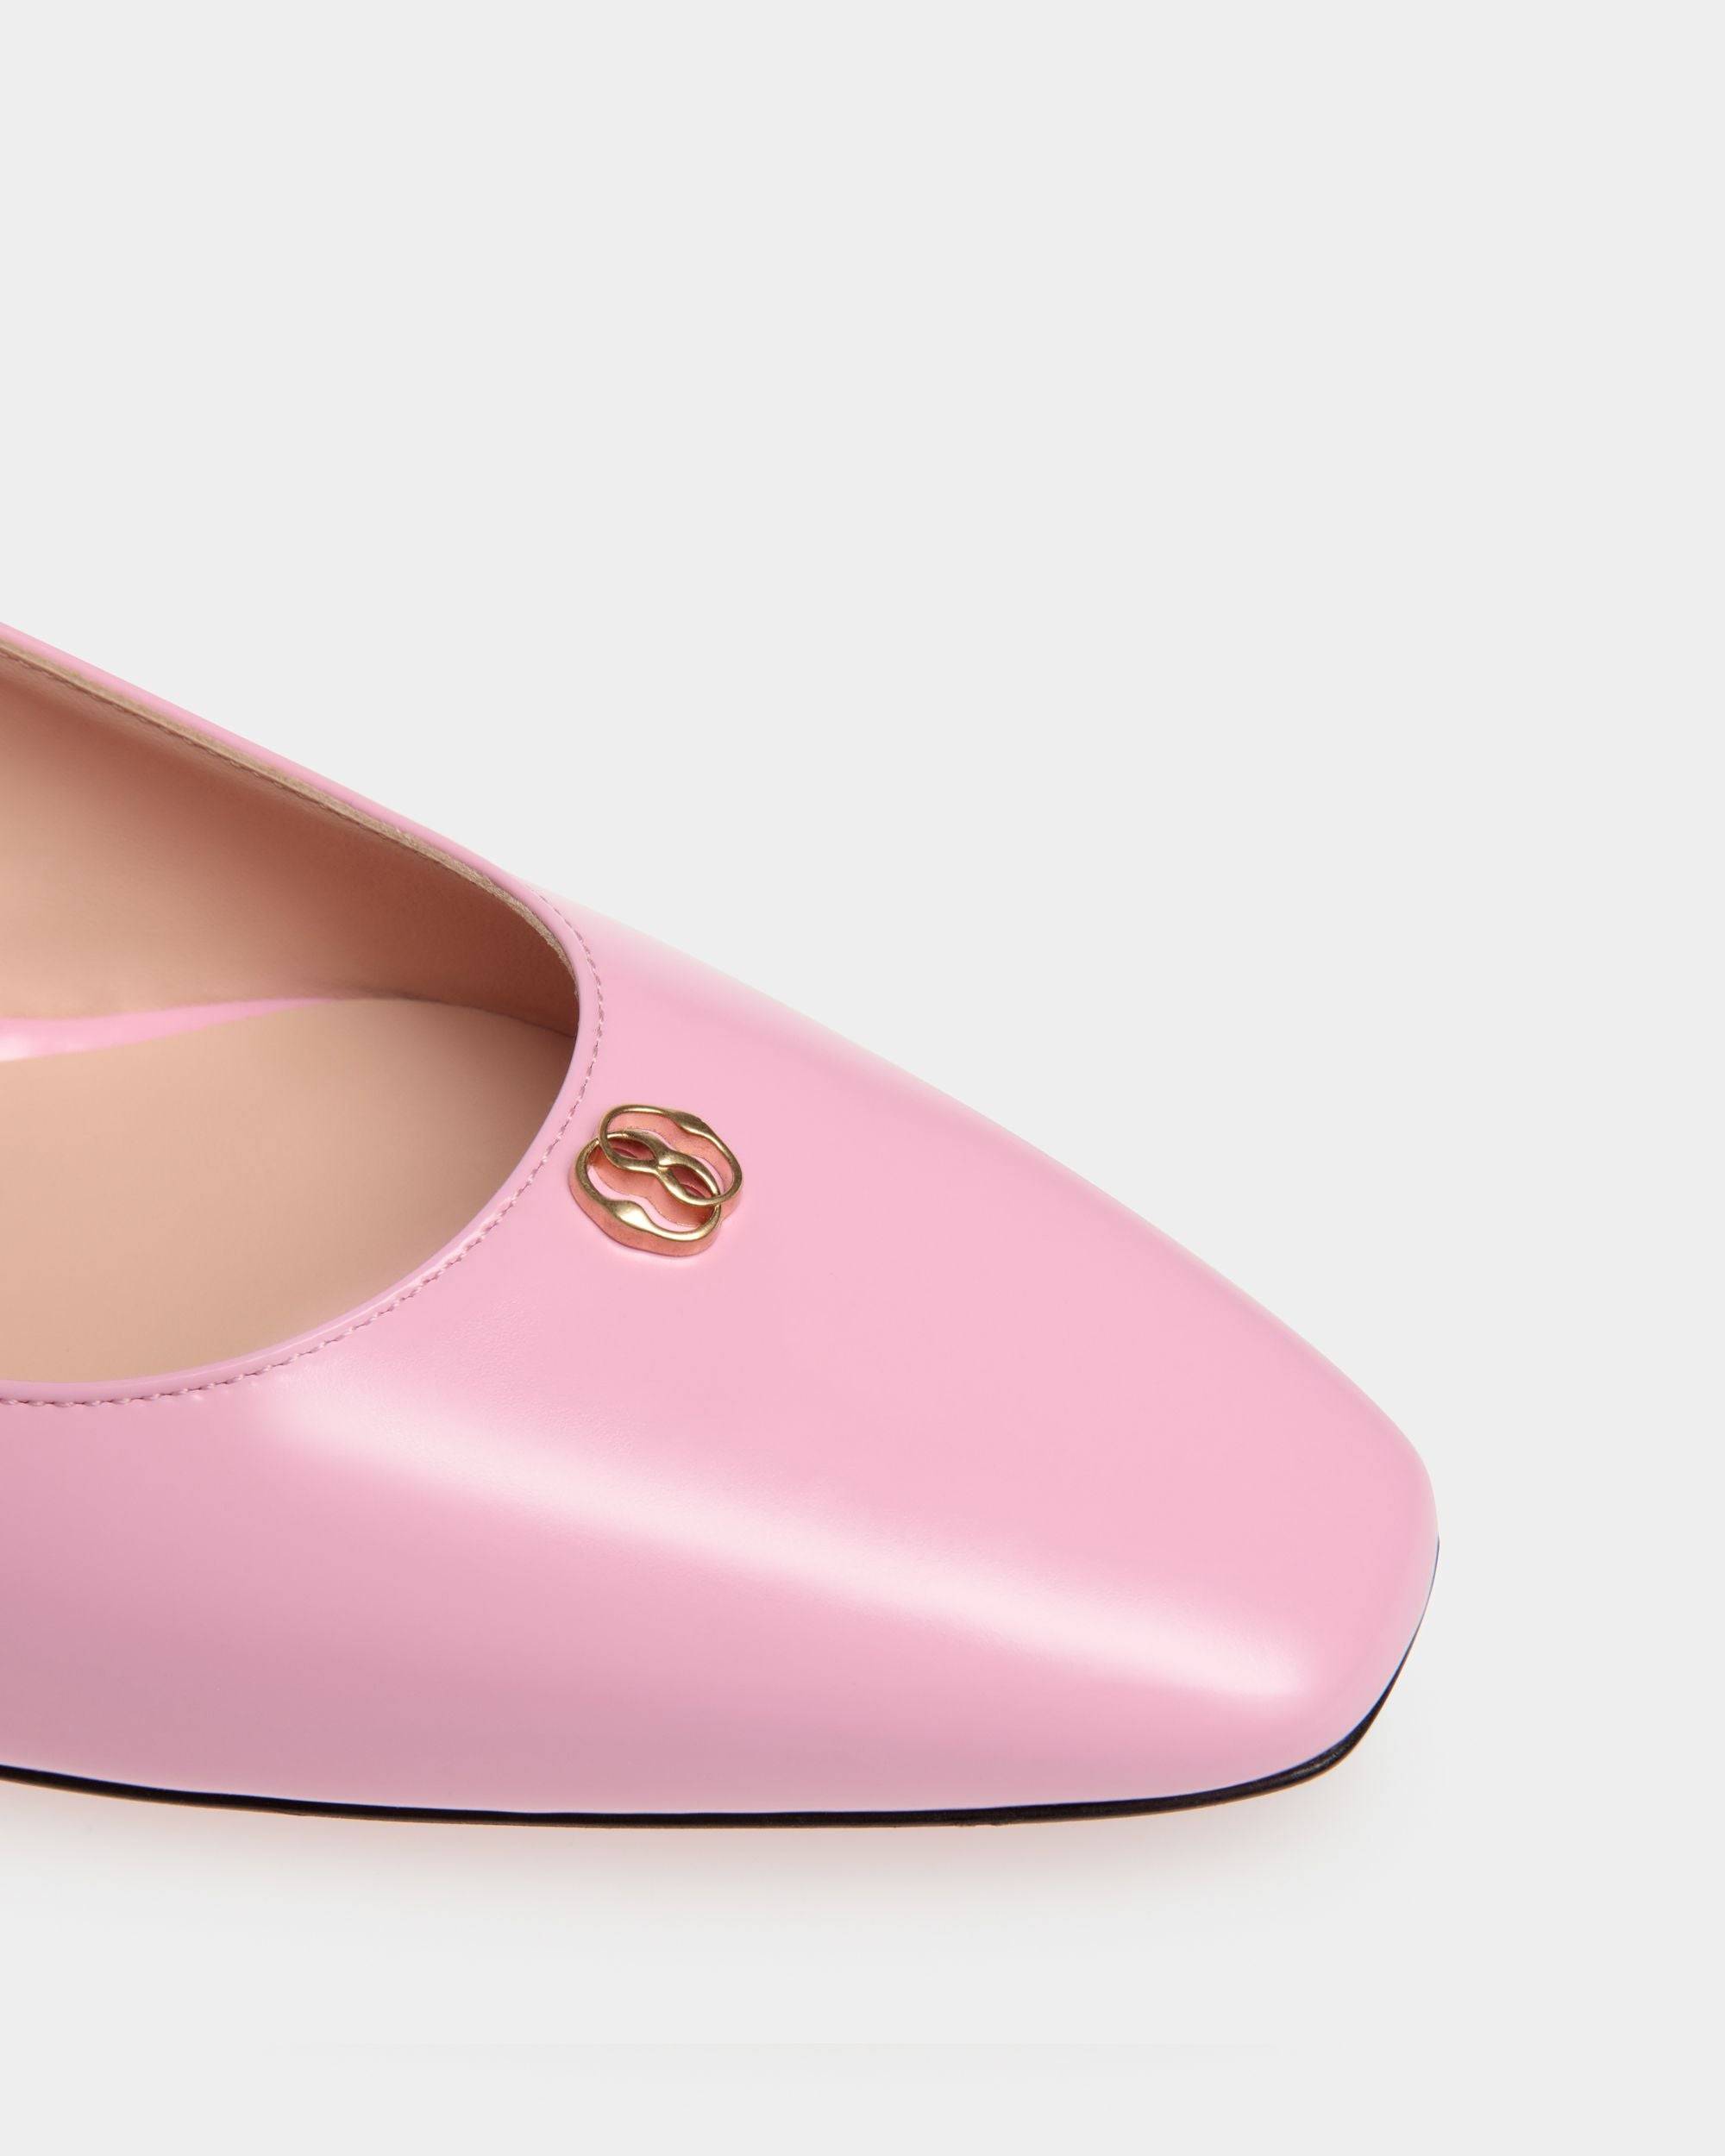 Sylt | Women's Slingback Pump in Pink Leather | Bally | Still Life Detail